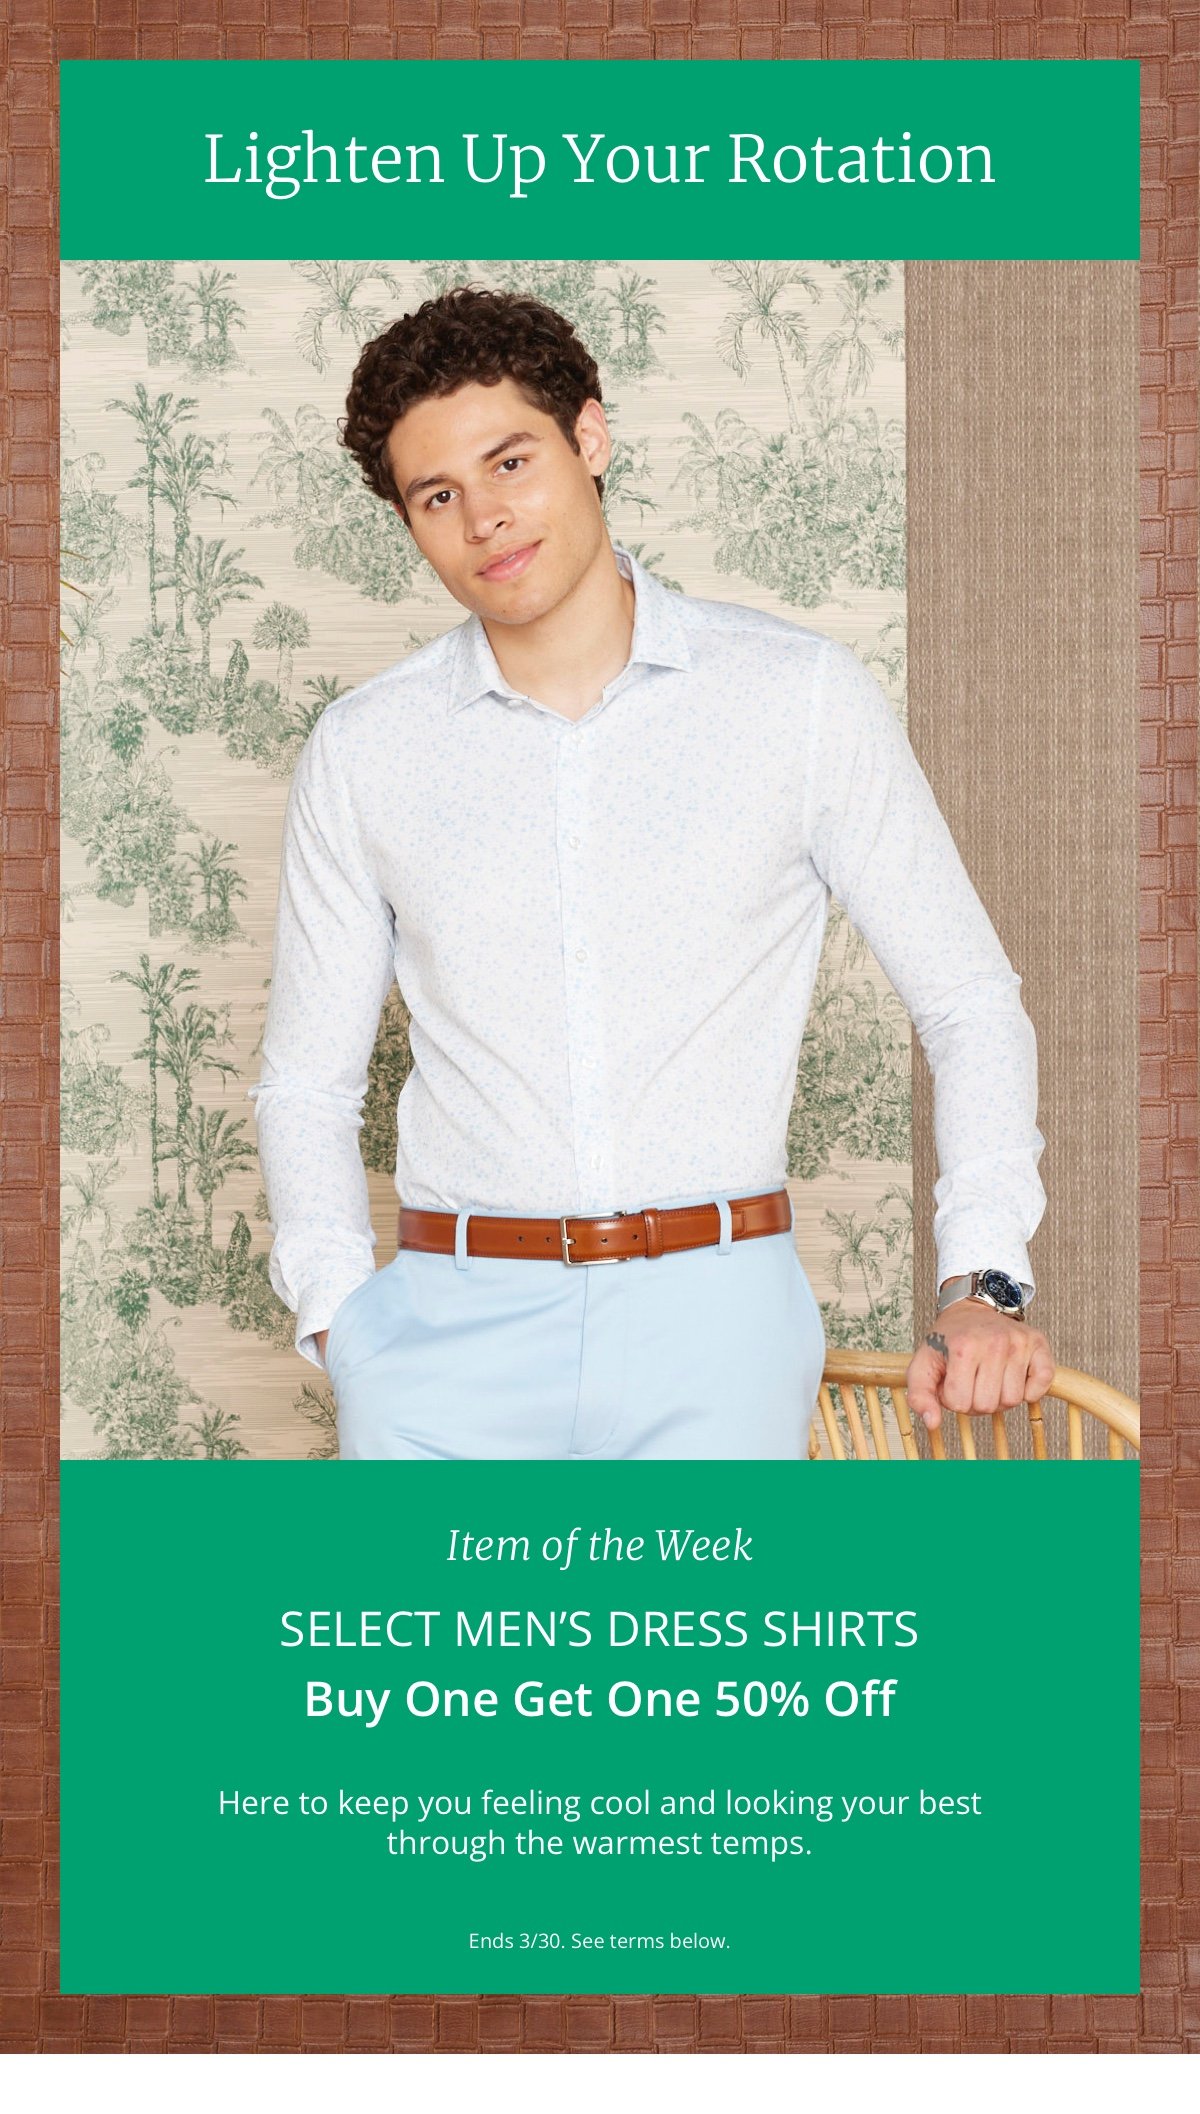 Lighten Up Your Rotation|Item of the Week|Select Men’s Dress Shirts|Buy One Get One 50% Off|Here to keep you feeling cool and looking your best through the warmest temps.|Ends 3/30. See terms below. 